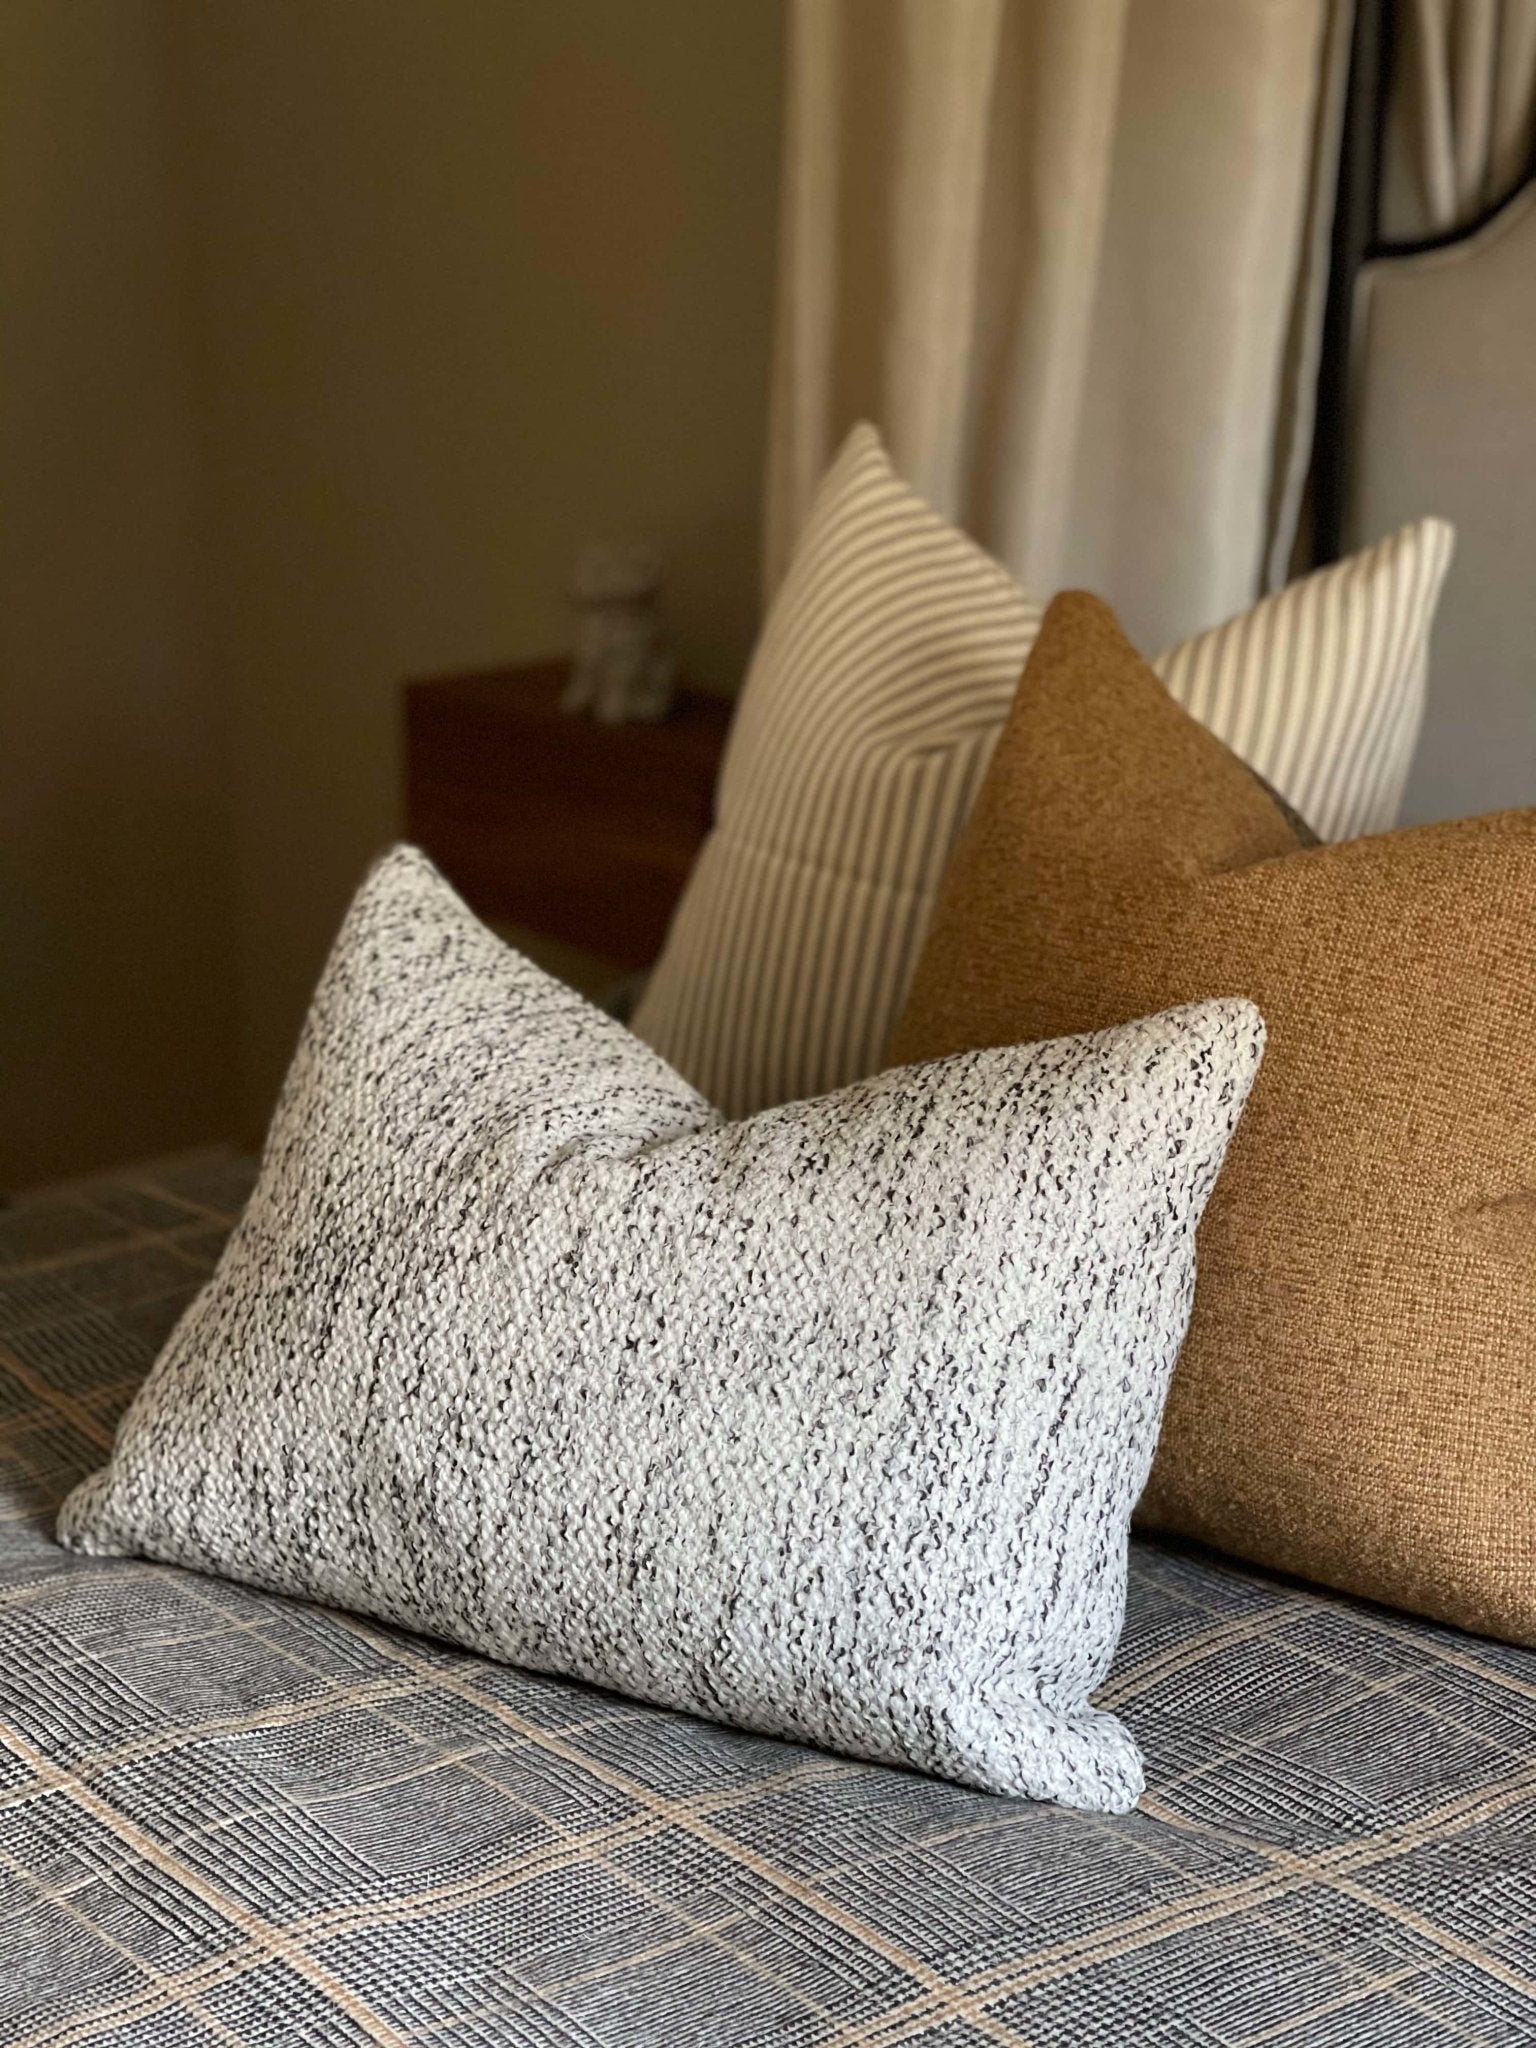 https://cdn.shopify.com/s/files/1/0563/5112/9690/products/custom-boucle-pillow-cover-groupings.jpg?v=1691695380&width=1536